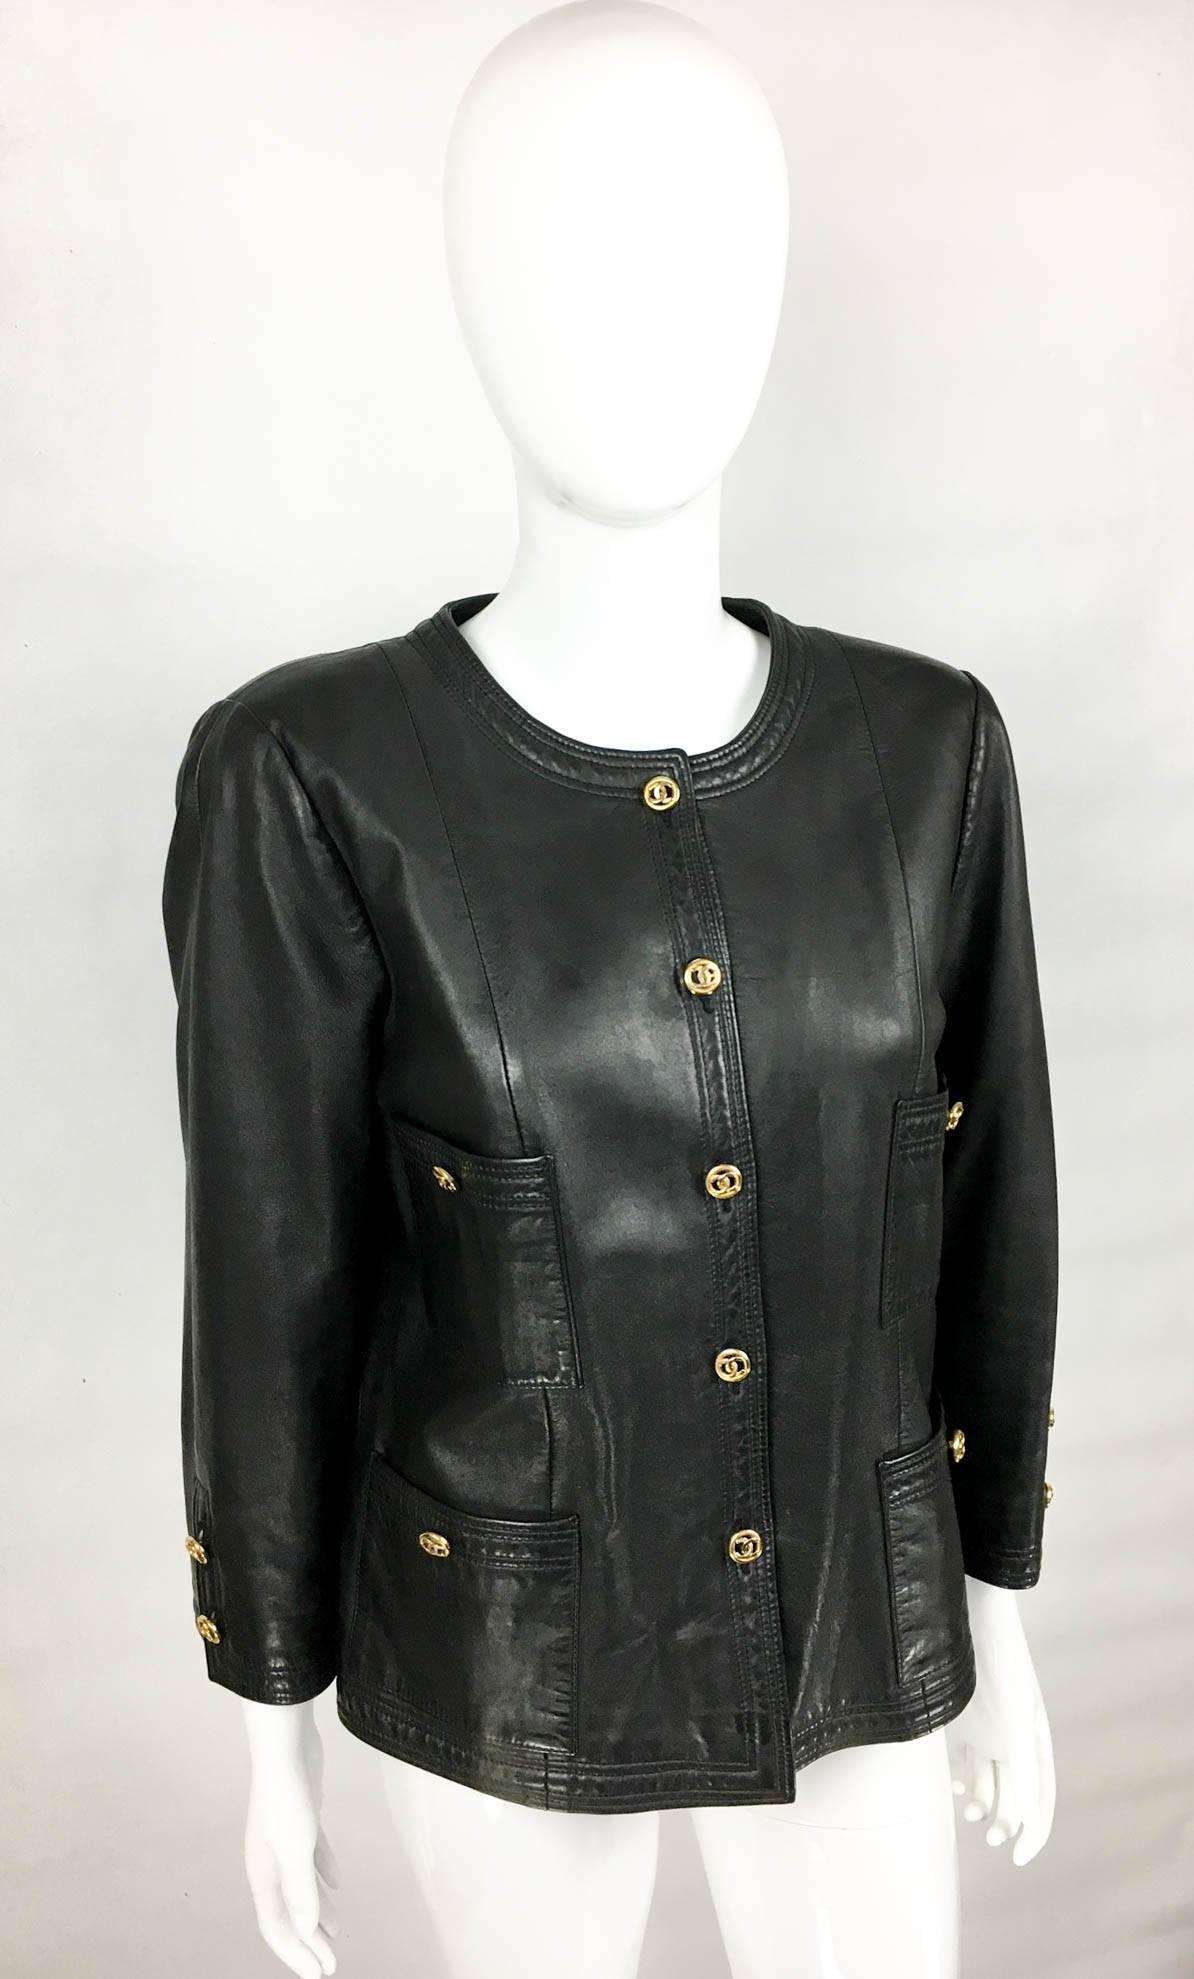 Chanel Black Leather Jacket With Gold-Tone Logo Buttons - 1980s 1